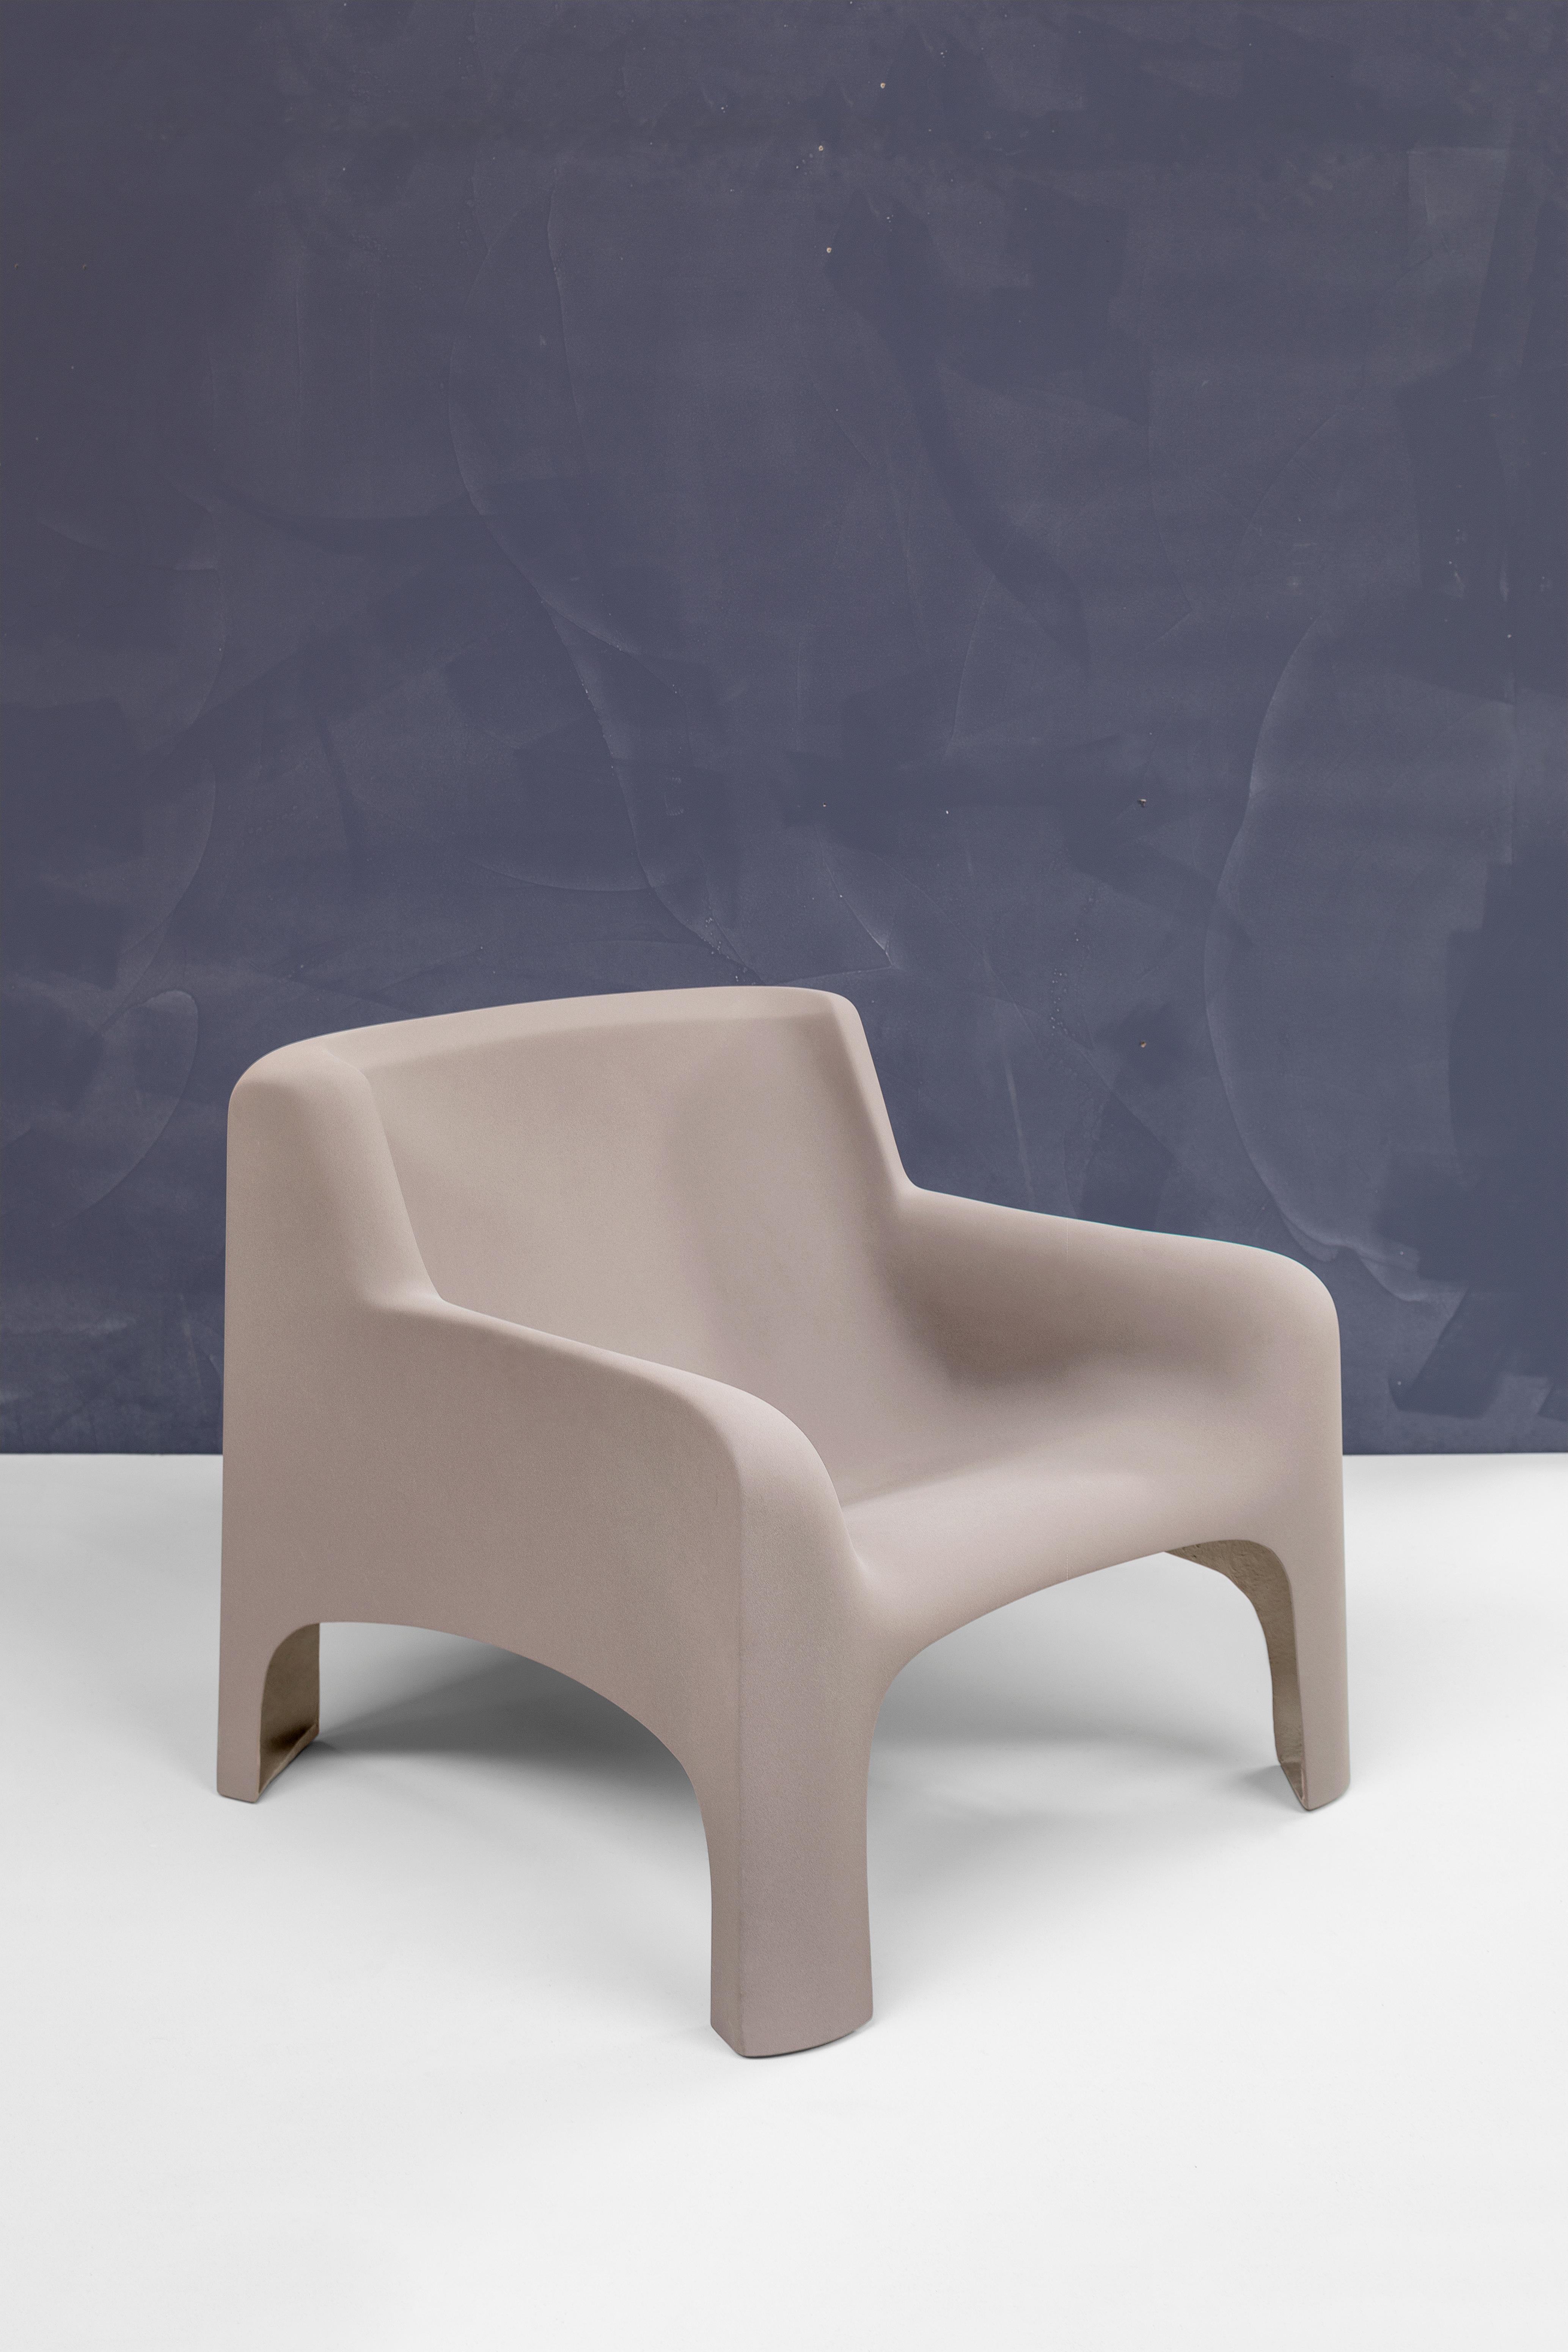 Transparency Matters Collection by Draga&Aurel:

Armchair, in fiberglass, production by Arflex, Designer Carlo Bartoli 1960/1969.
Vintage piece has been tranformed in to a contemporary item with matte coat.

Color violet light. Size cm 78 x 81